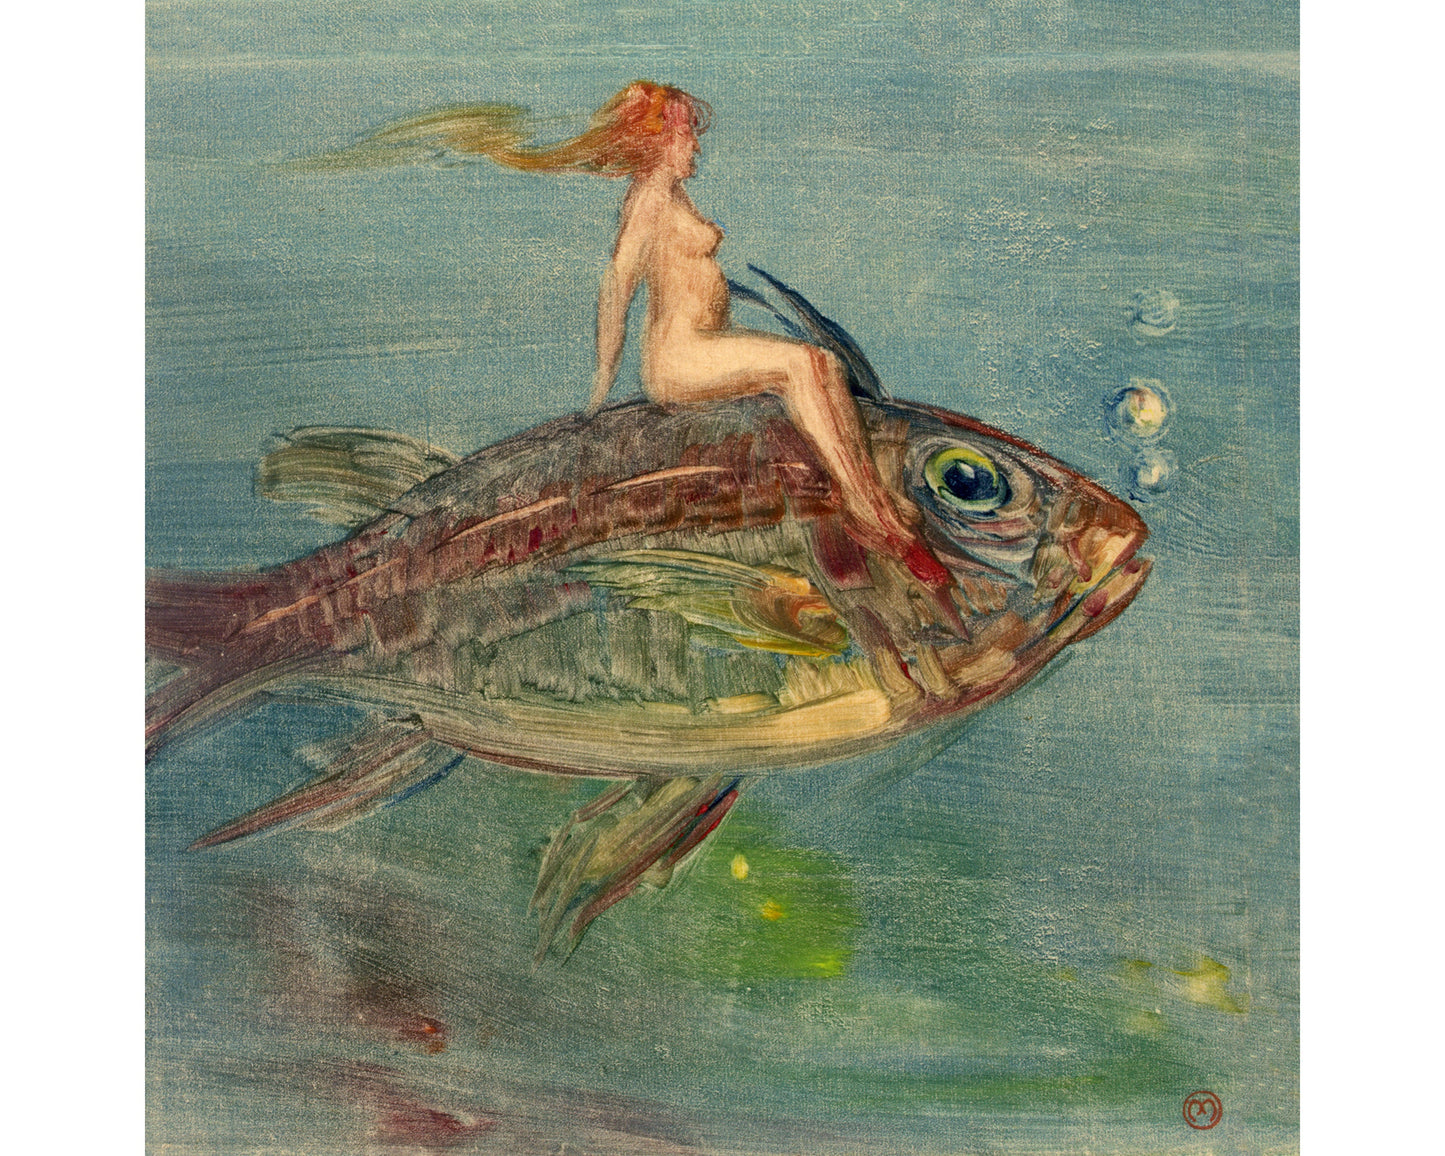 Woman riding a fish print | Valkyrie of the sea | Nude female painting | Nordic mythology wall art | Mexican artist | Xavier Martinez